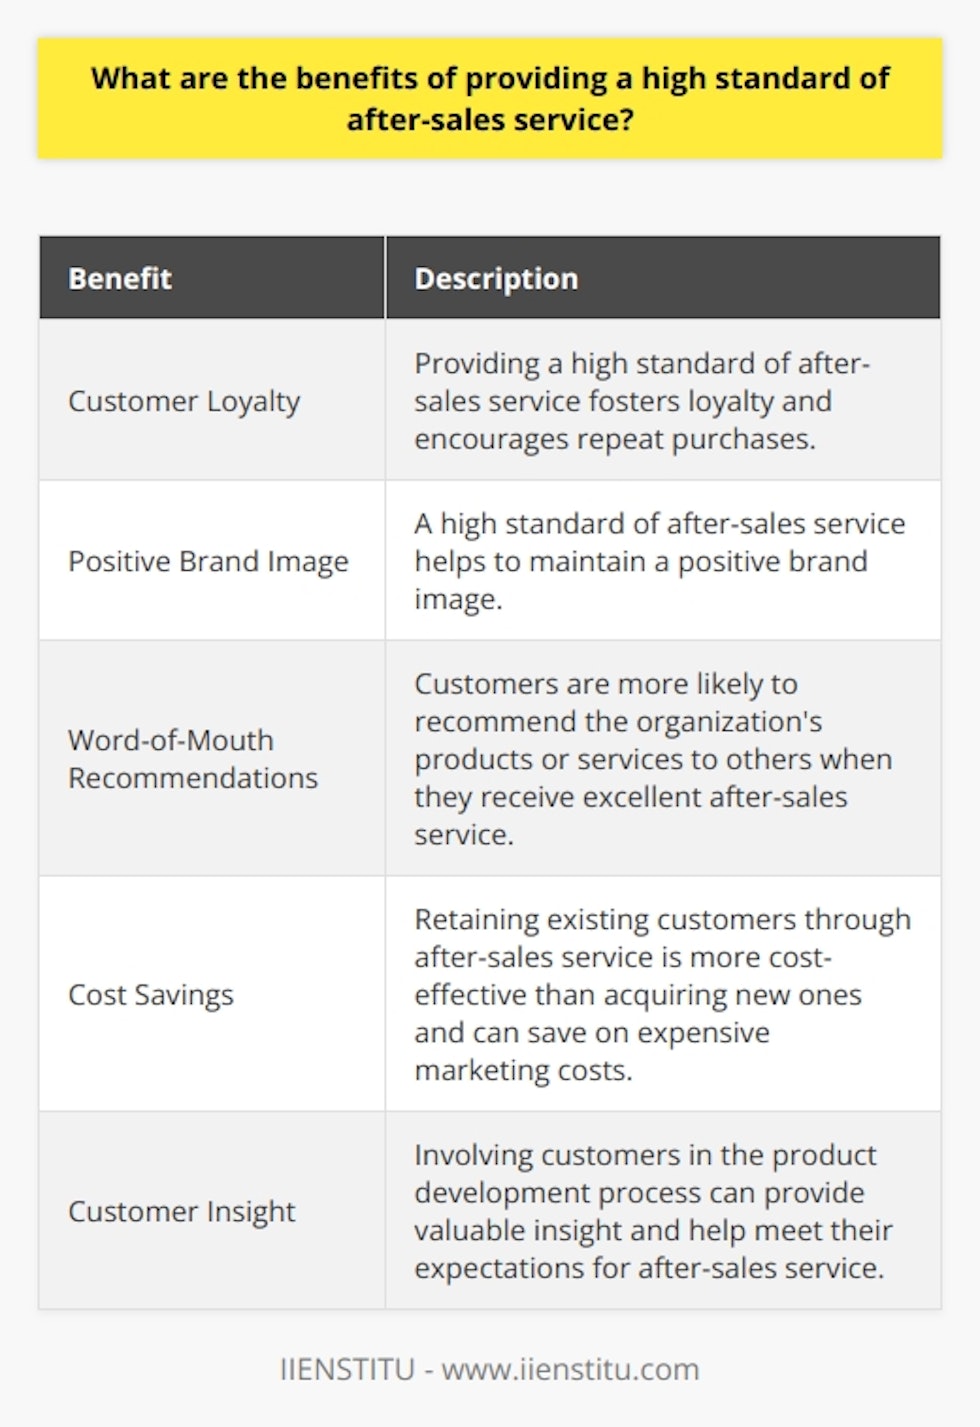 Providing a high standard of after-sales service offers numerous benefits for organizations. Customers value post-sales service as much as the product itself, which fosters loyalty and encourages repeat purchases. It also helps to maintain a positive brand image and increases the likelihood of customers recommending the organization's products or services to others. Retaining existing customers is more cost-effective than acquiring new ones, so investing in after-sales service can save on expensive marketing costs. To ensure a high standard of service, organizations should create a strategic plan that outlines clear objectives and goals, includes procedures for handling customer inquiries, and utilizes customer feedback to identify areas for improvement. Additionally, involving customers in the product development process can provide valuable insight and help meet their expectations. Overall, providing exceptional after-sales service is vital for building customer loyalty, enhancing reputation, and driving business success.